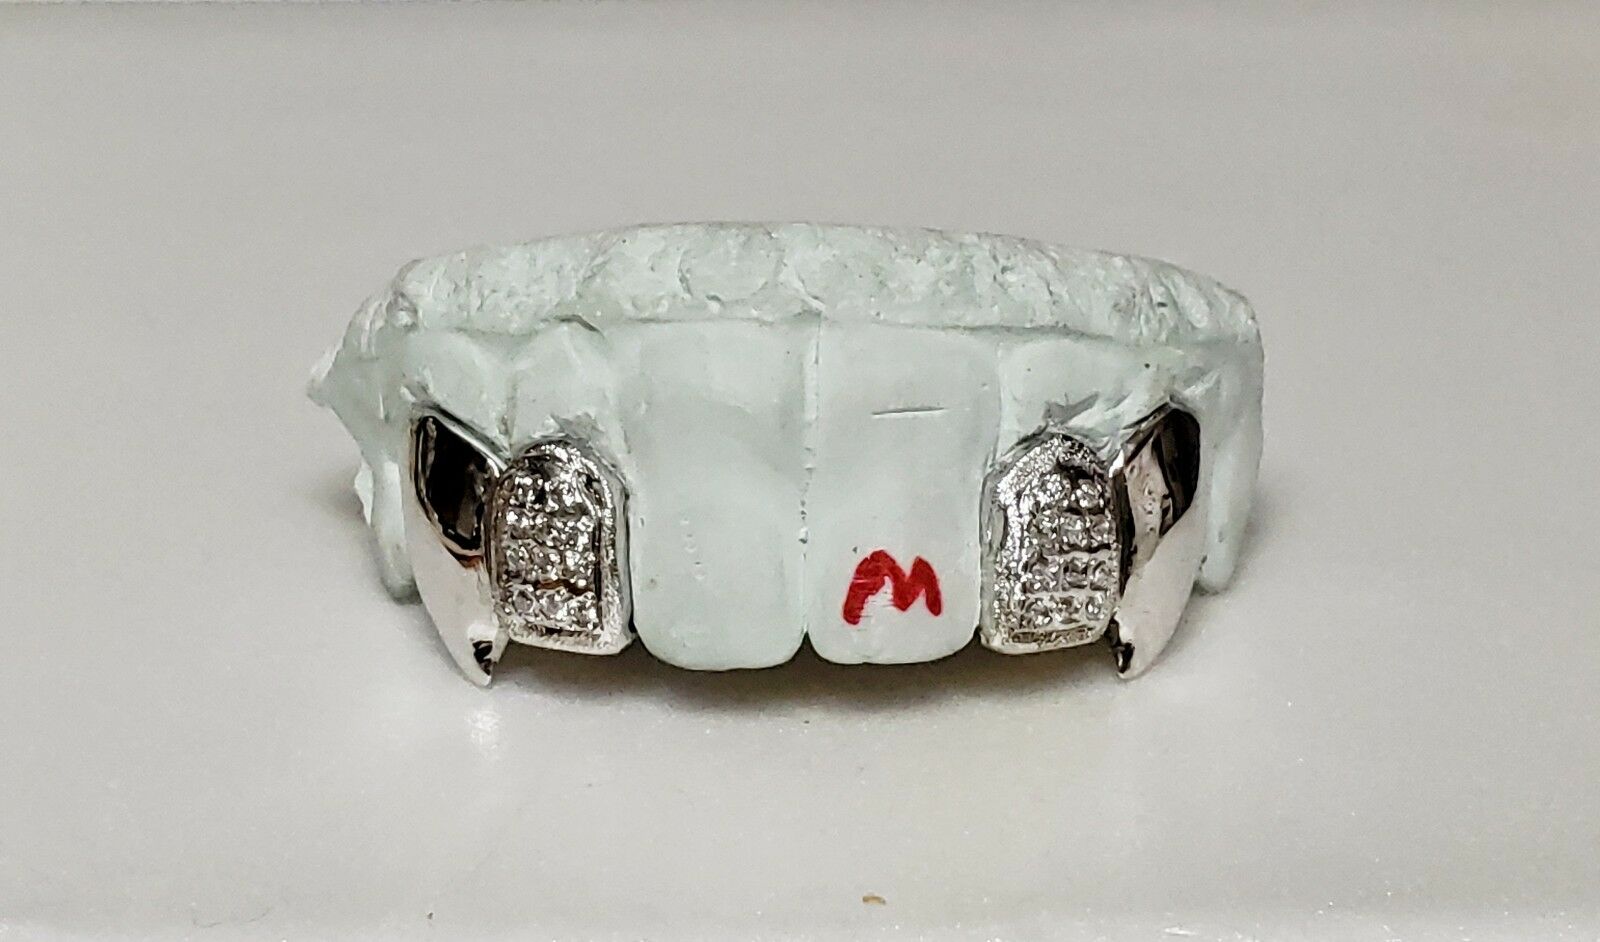 Custom Grillz Mold Kit For Teeth Impression Mouth Guard Mold Putty For  Grills